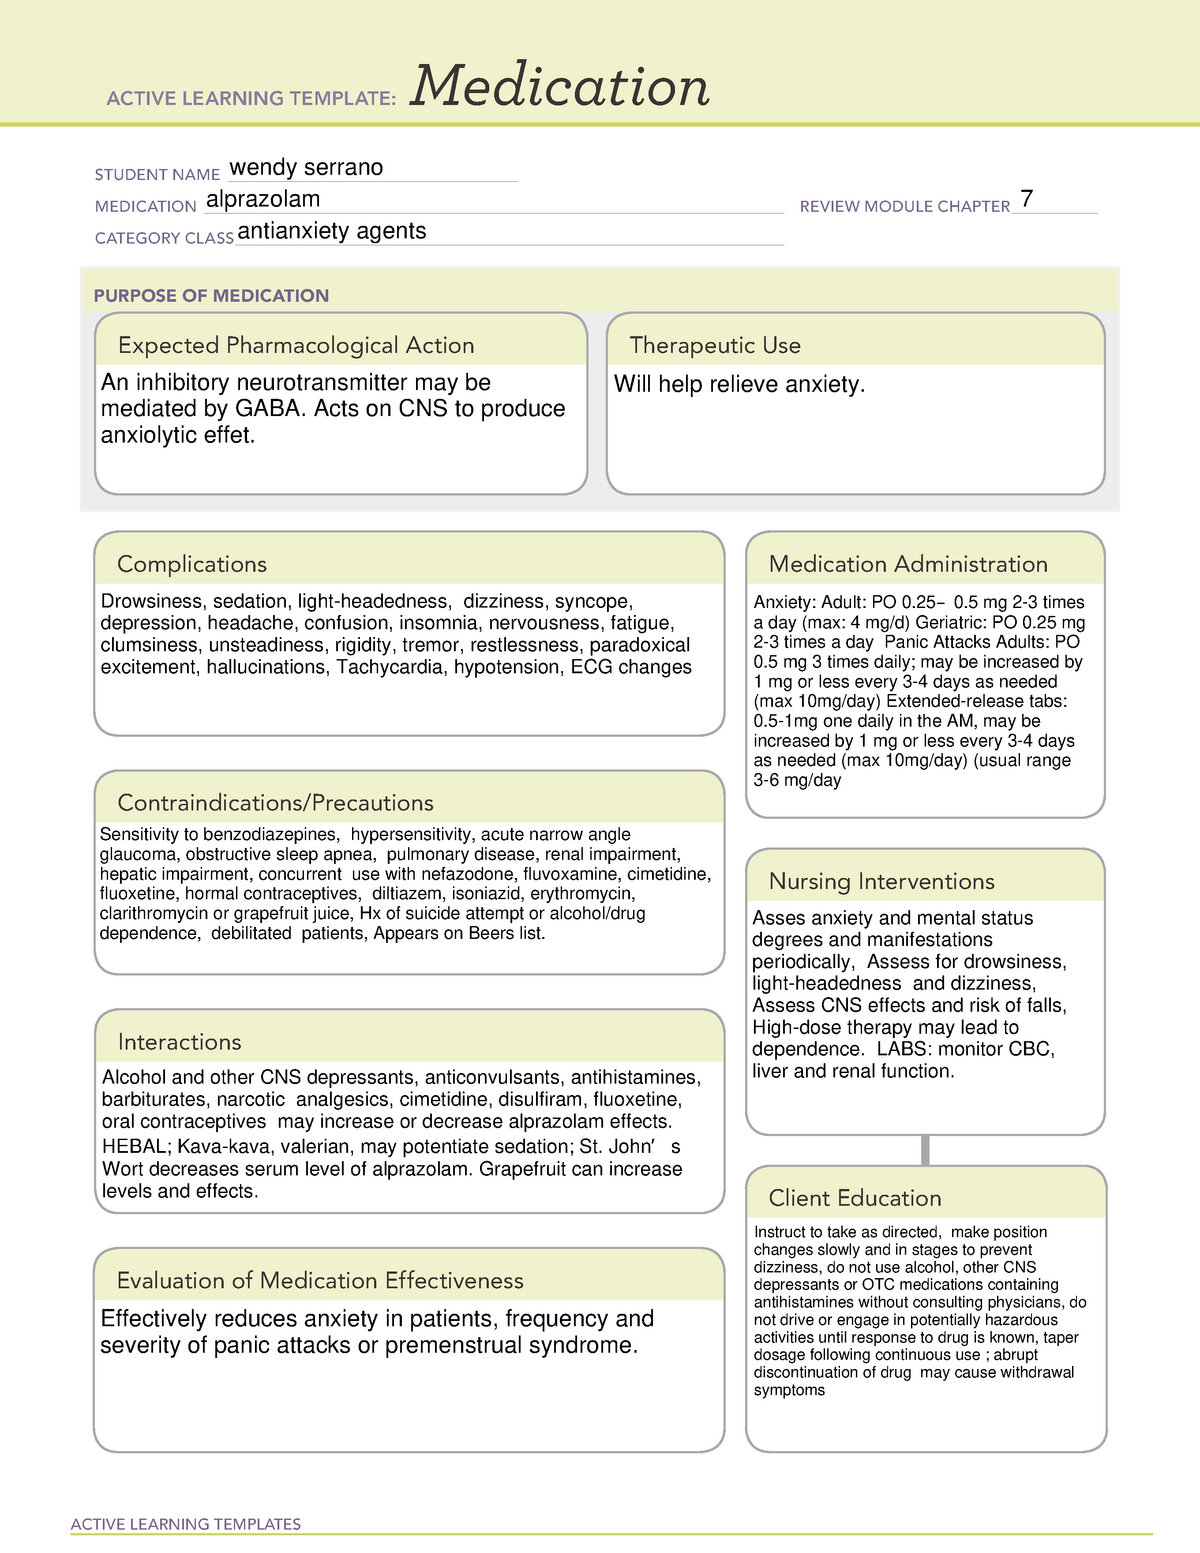 ati-medication-template-15-active-learning-templates-medication